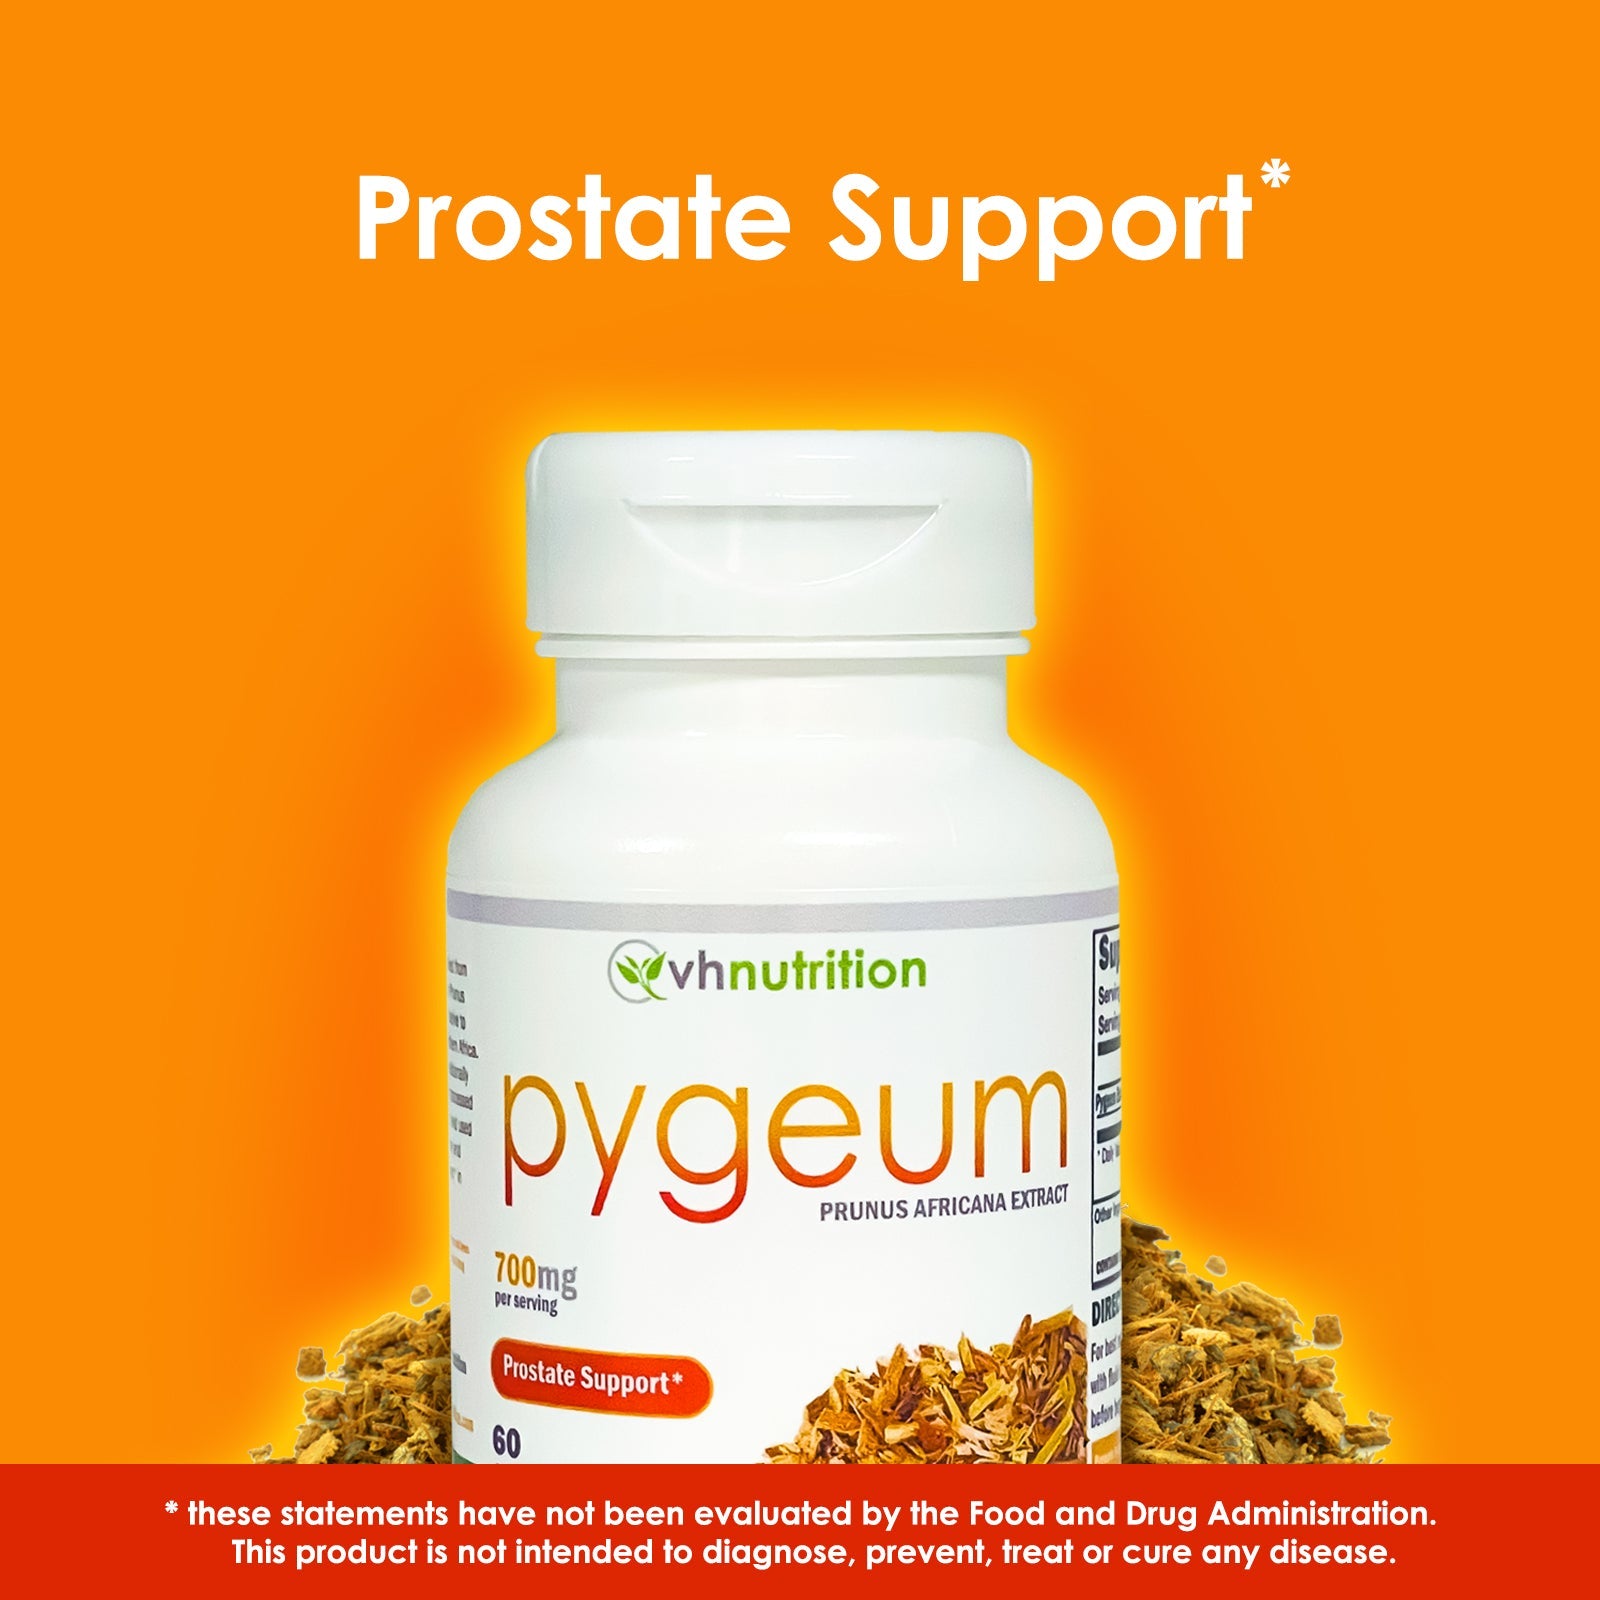 VH Nutrition PYGEUM | Prostate Support Supplement* | Male Reproductive Support* Supplement | 700mg Proprietary Formula | 60 Capsules